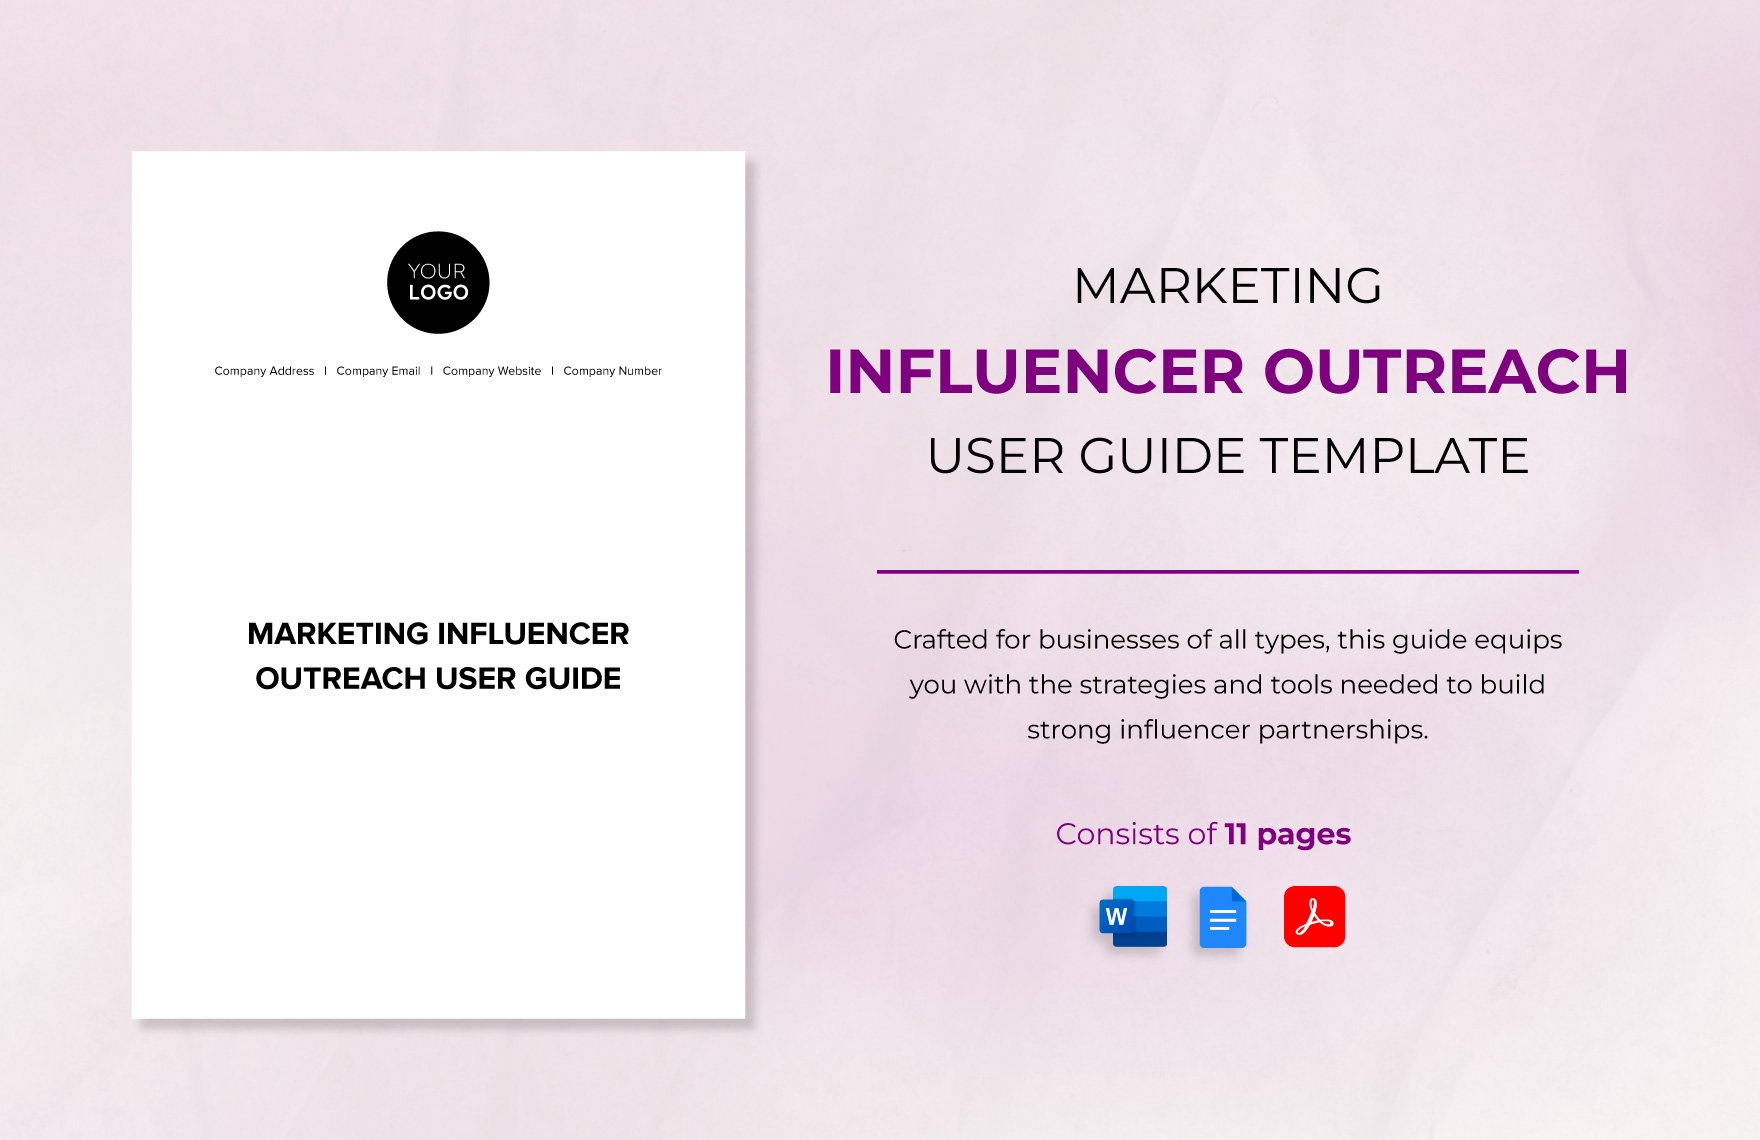 Marketing Influencer Outreach User Guide Template in Word, Google Docs, PDF